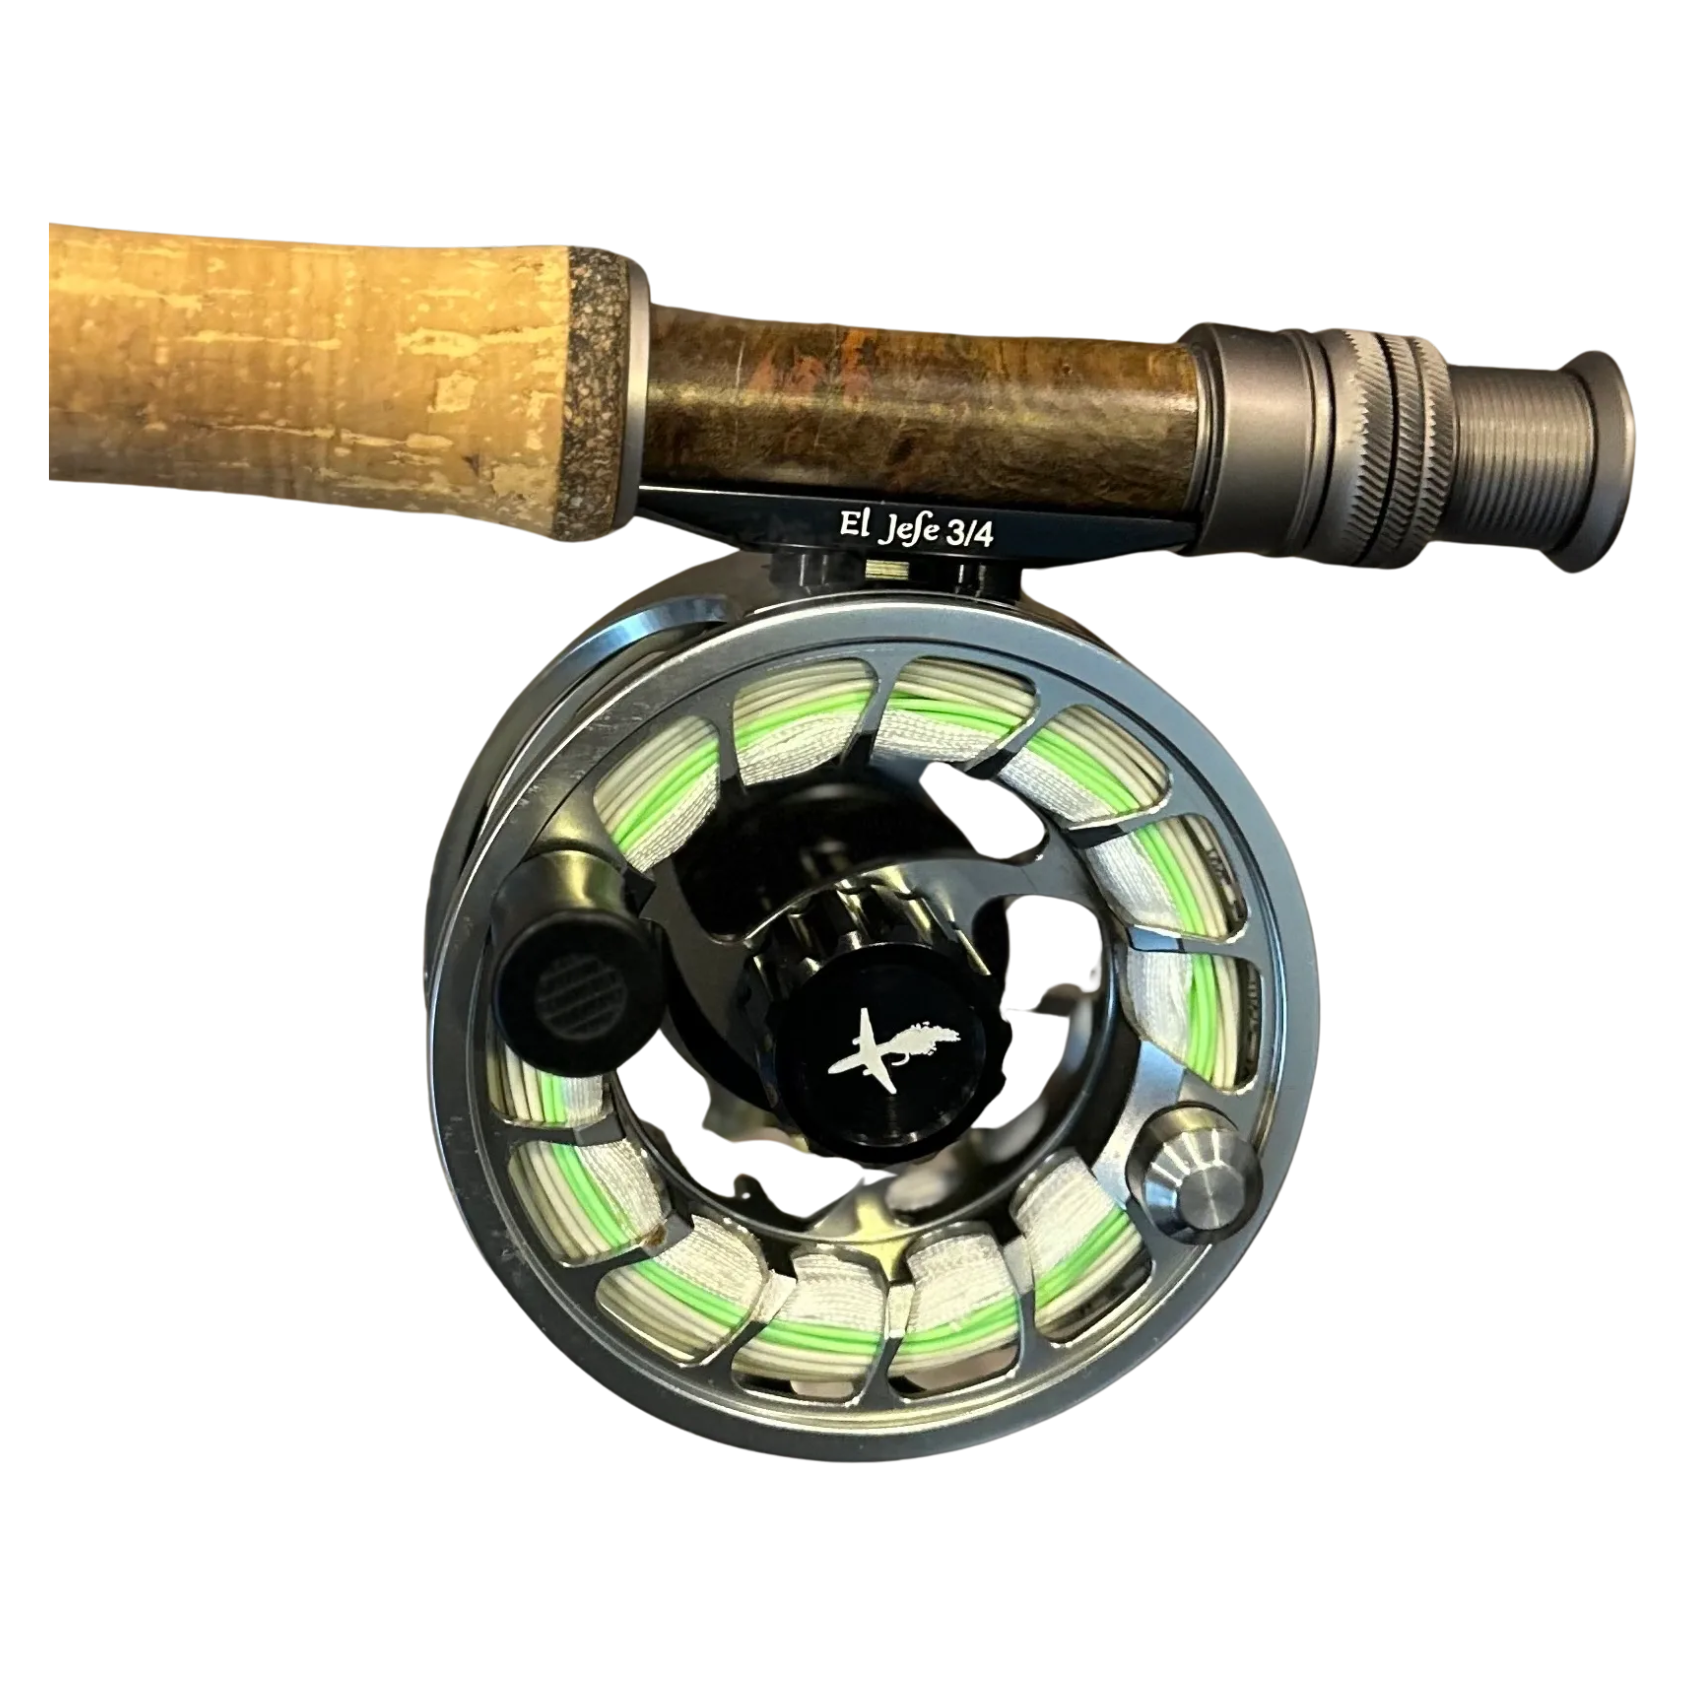 El Jefe Fly Fishing Combo Package | 906-5 | 9' Six Section 5 Weight Fly Rod  And Reel Outfit